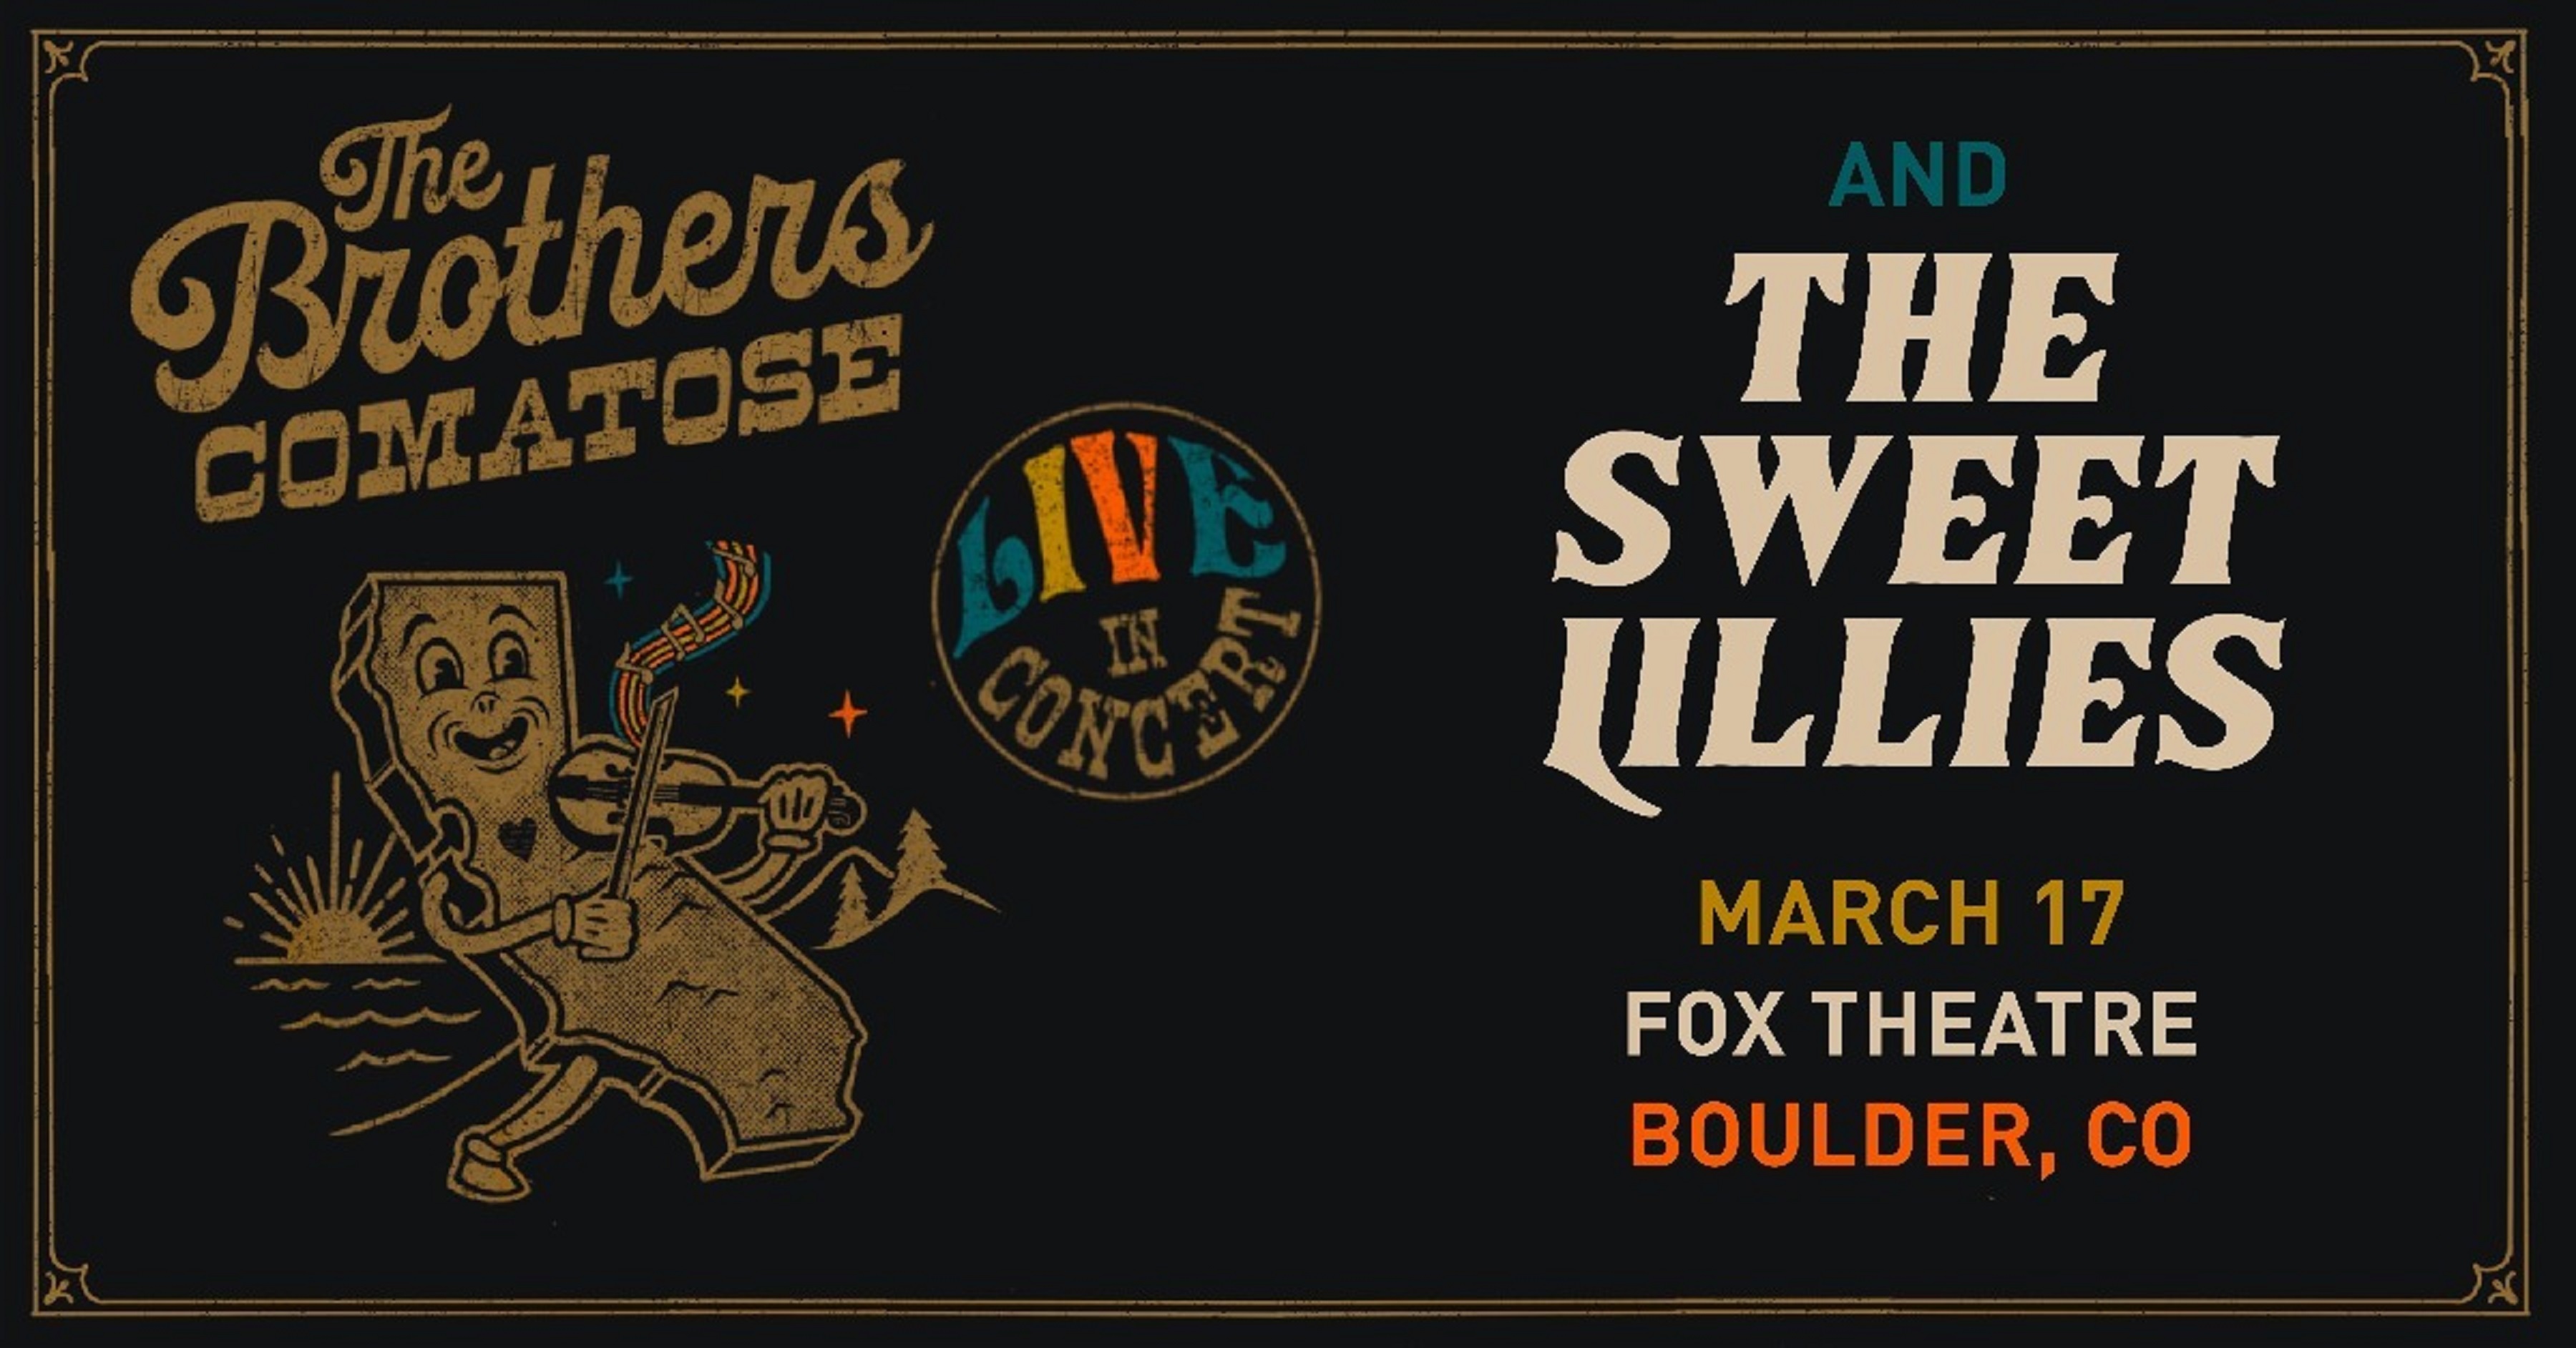 The Brothers Comatose + The Sweet Lillies to play The Fox Theatre on St. Paddy's Day